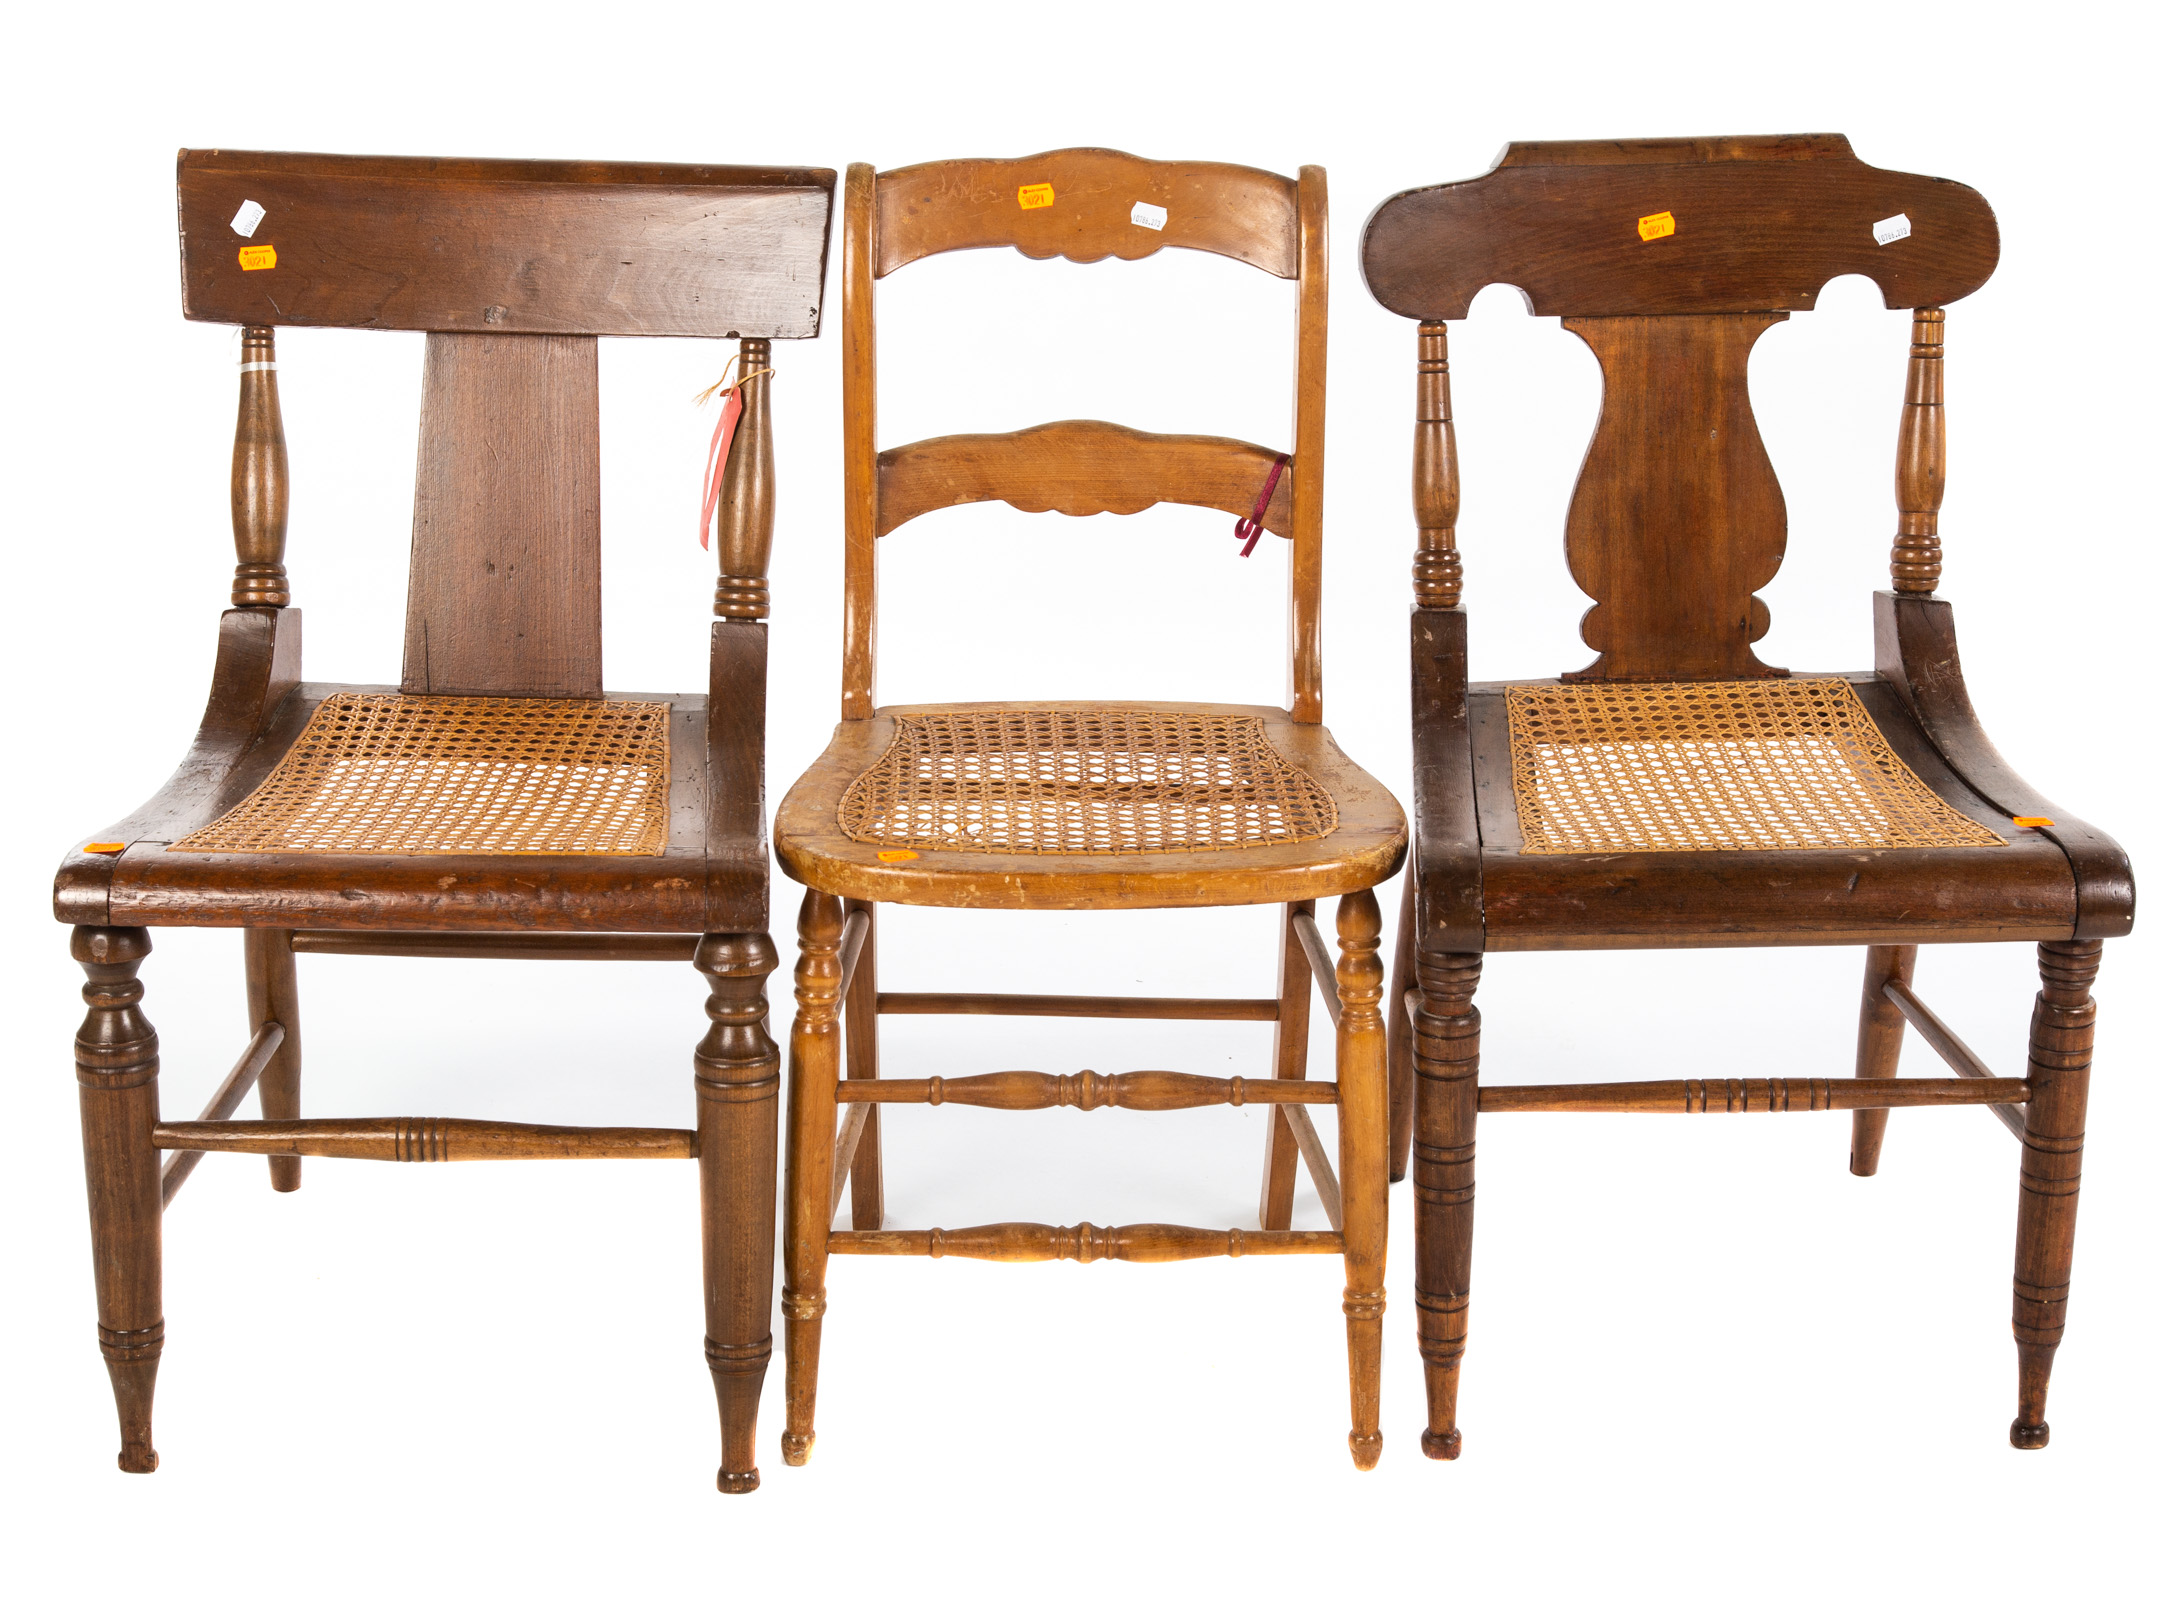 THREE WOODEN SIDE CHAIRS WITH CANE SEATS